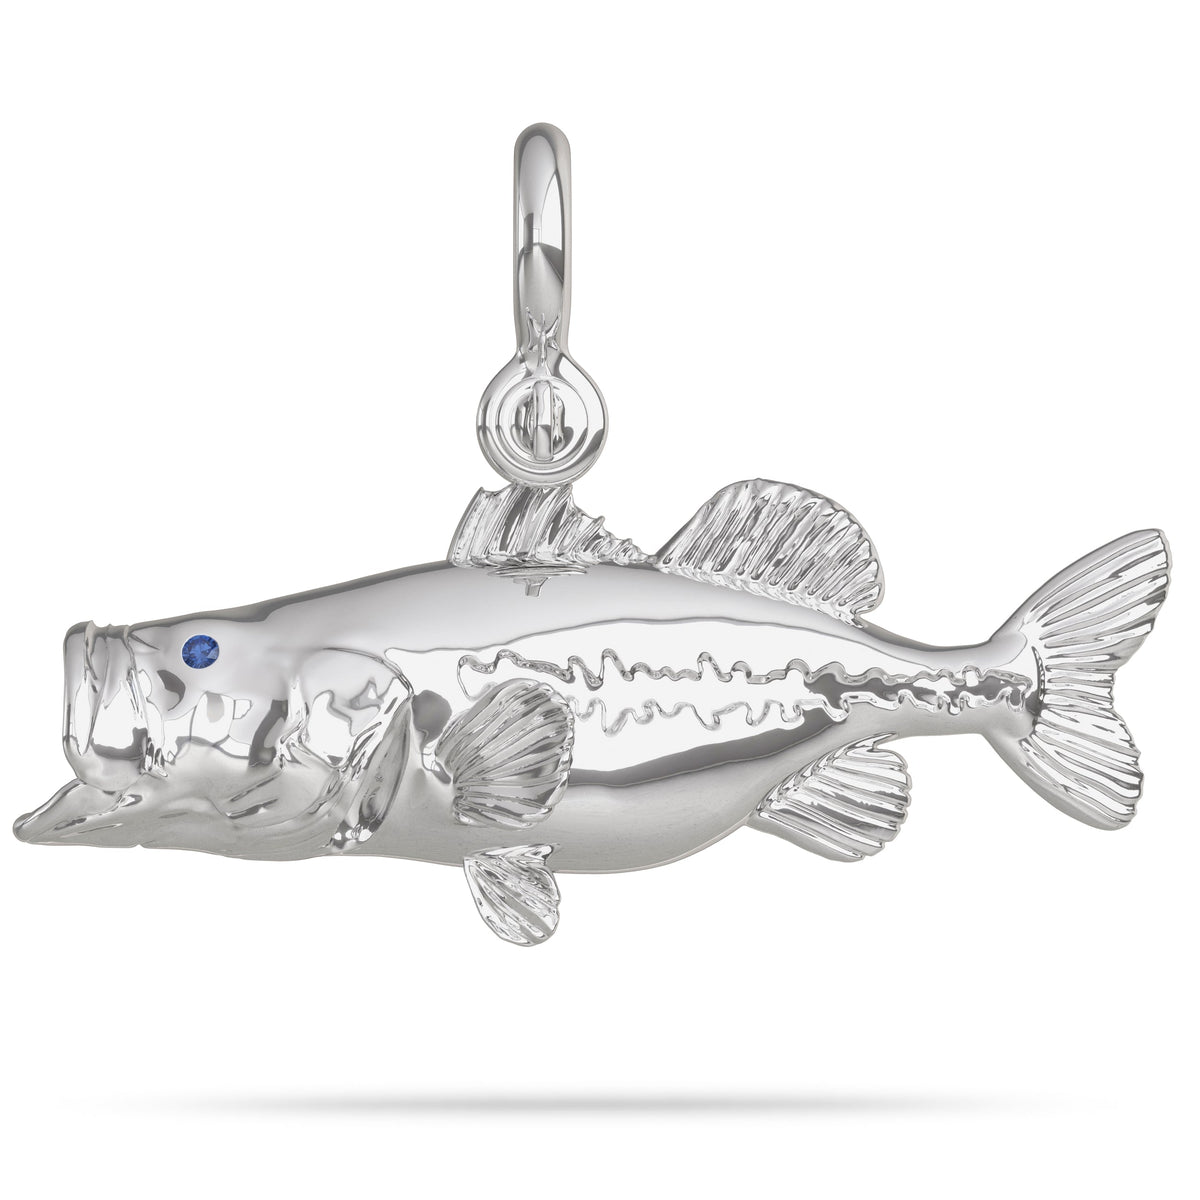 Sterling Silver Largemouth Bass Pendant With Mouth Wide Open Feeding High Polished Mirror Finish With Blue Sapphire Eye with A Mariner Shackle Bail Custom Designed By Nautical Treasure Jewelry In The Florida Keys 